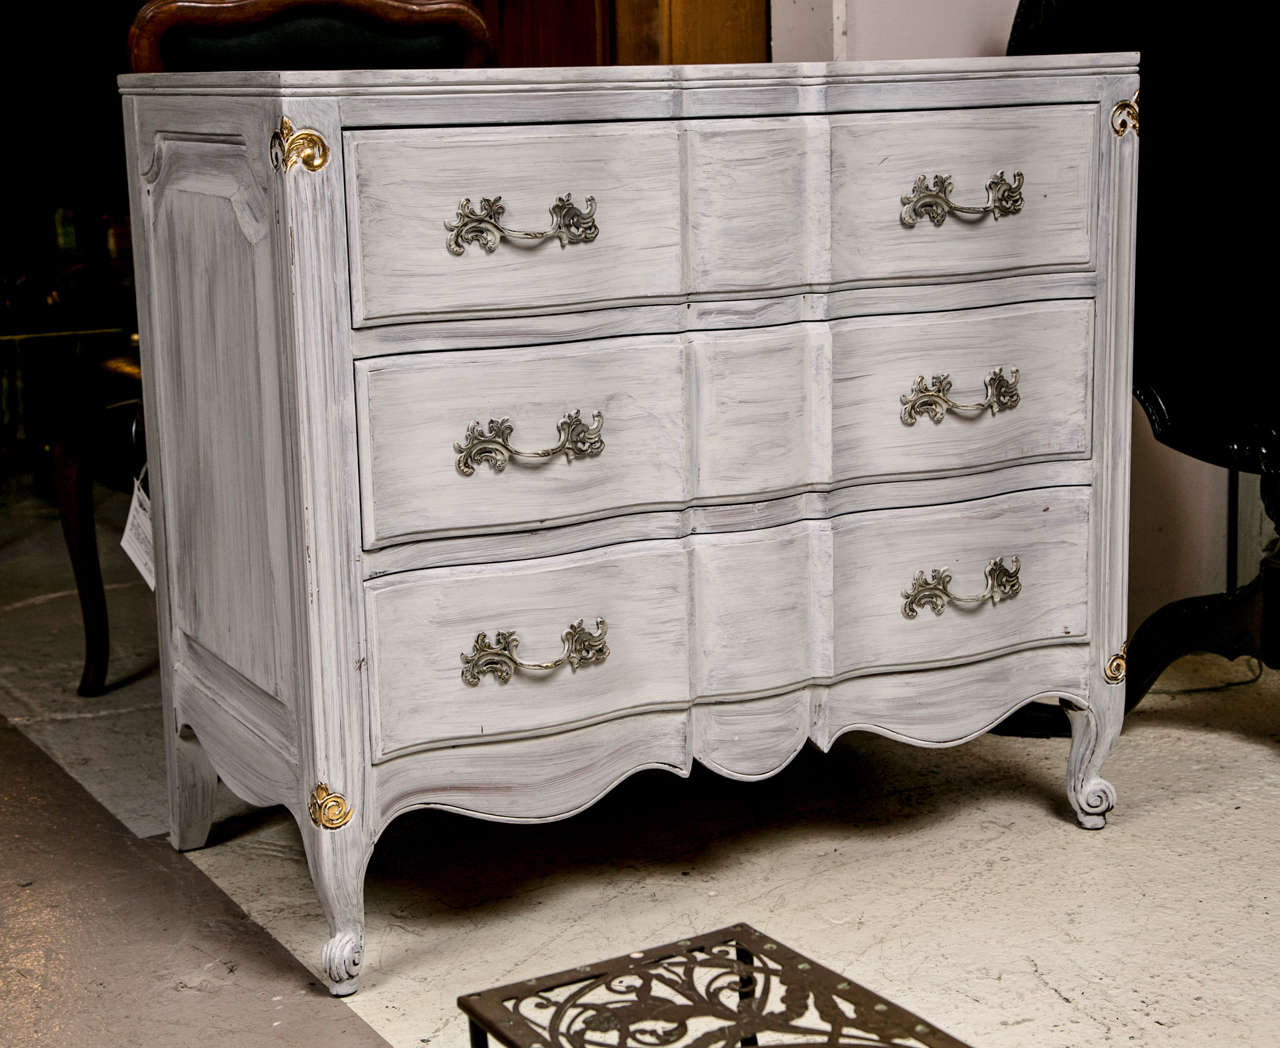 Pair of chests in Louis XV style, each white distress-painted, the conforming case fitted with three drawers each with brass pulls, raised on short cabriole legs ending in scrolled toes. Each having the Dixon powdermaker stamp. The Orleans